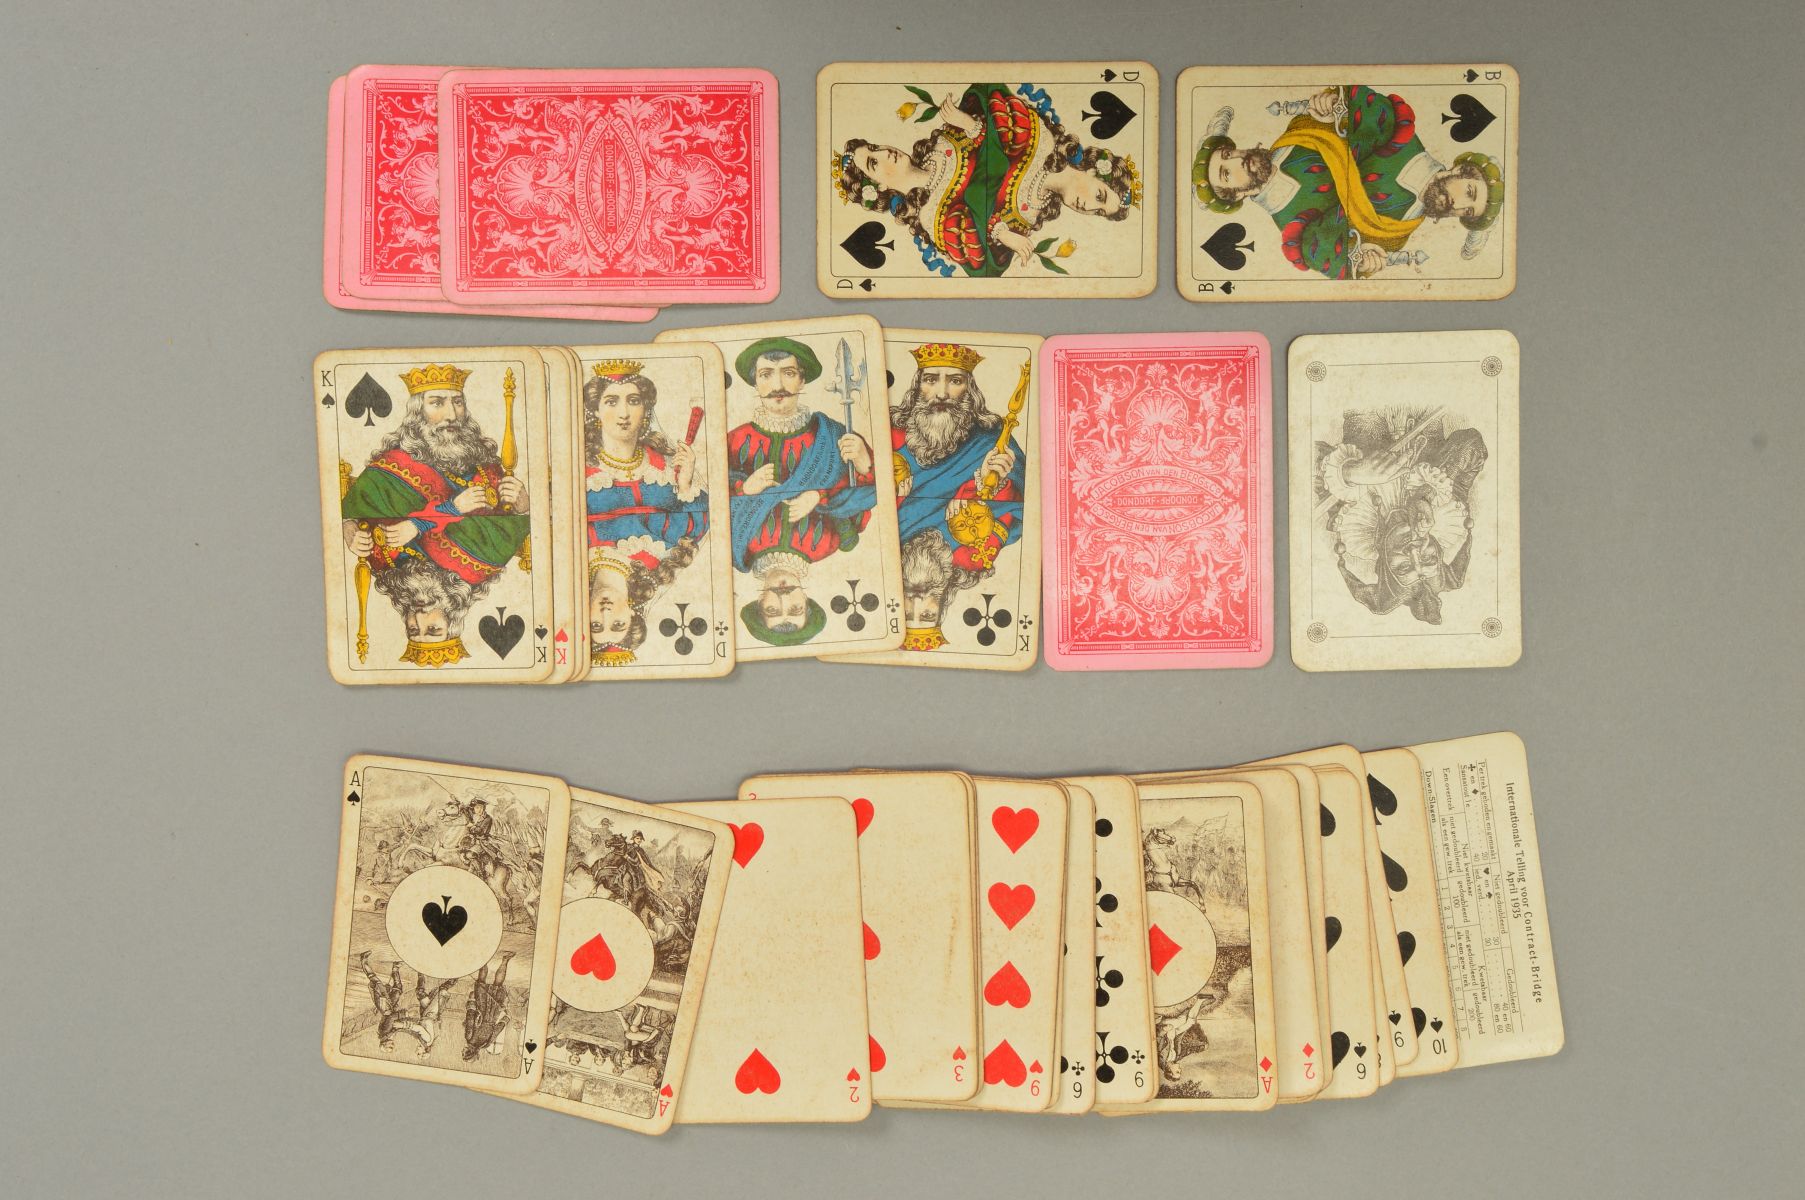 PLAYING CARDS, GERMANY, DONDORF, FRANKFURT, Rhineland pattern, Standard Courts, Ace each have two